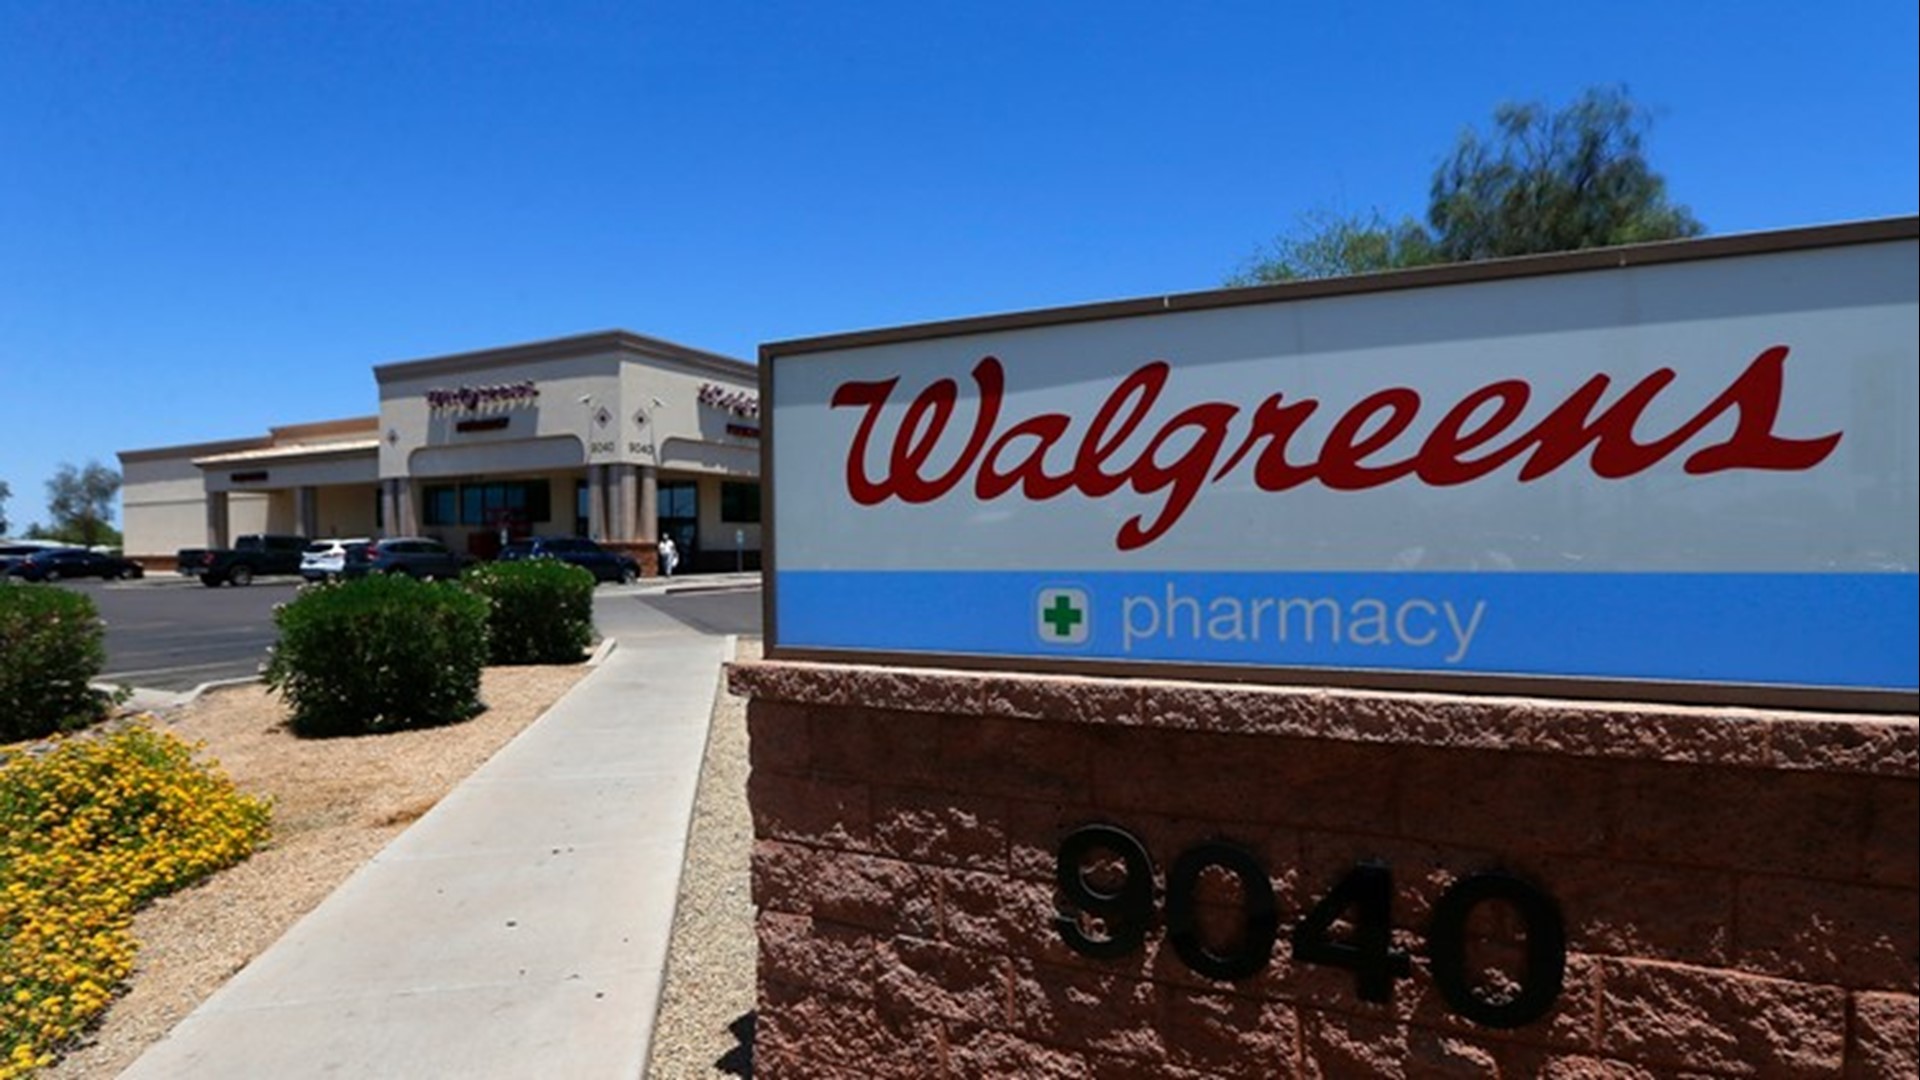 Walgreens and other pharmacies will first help vaccinate health care workers and those who live and work in long-term care communities.